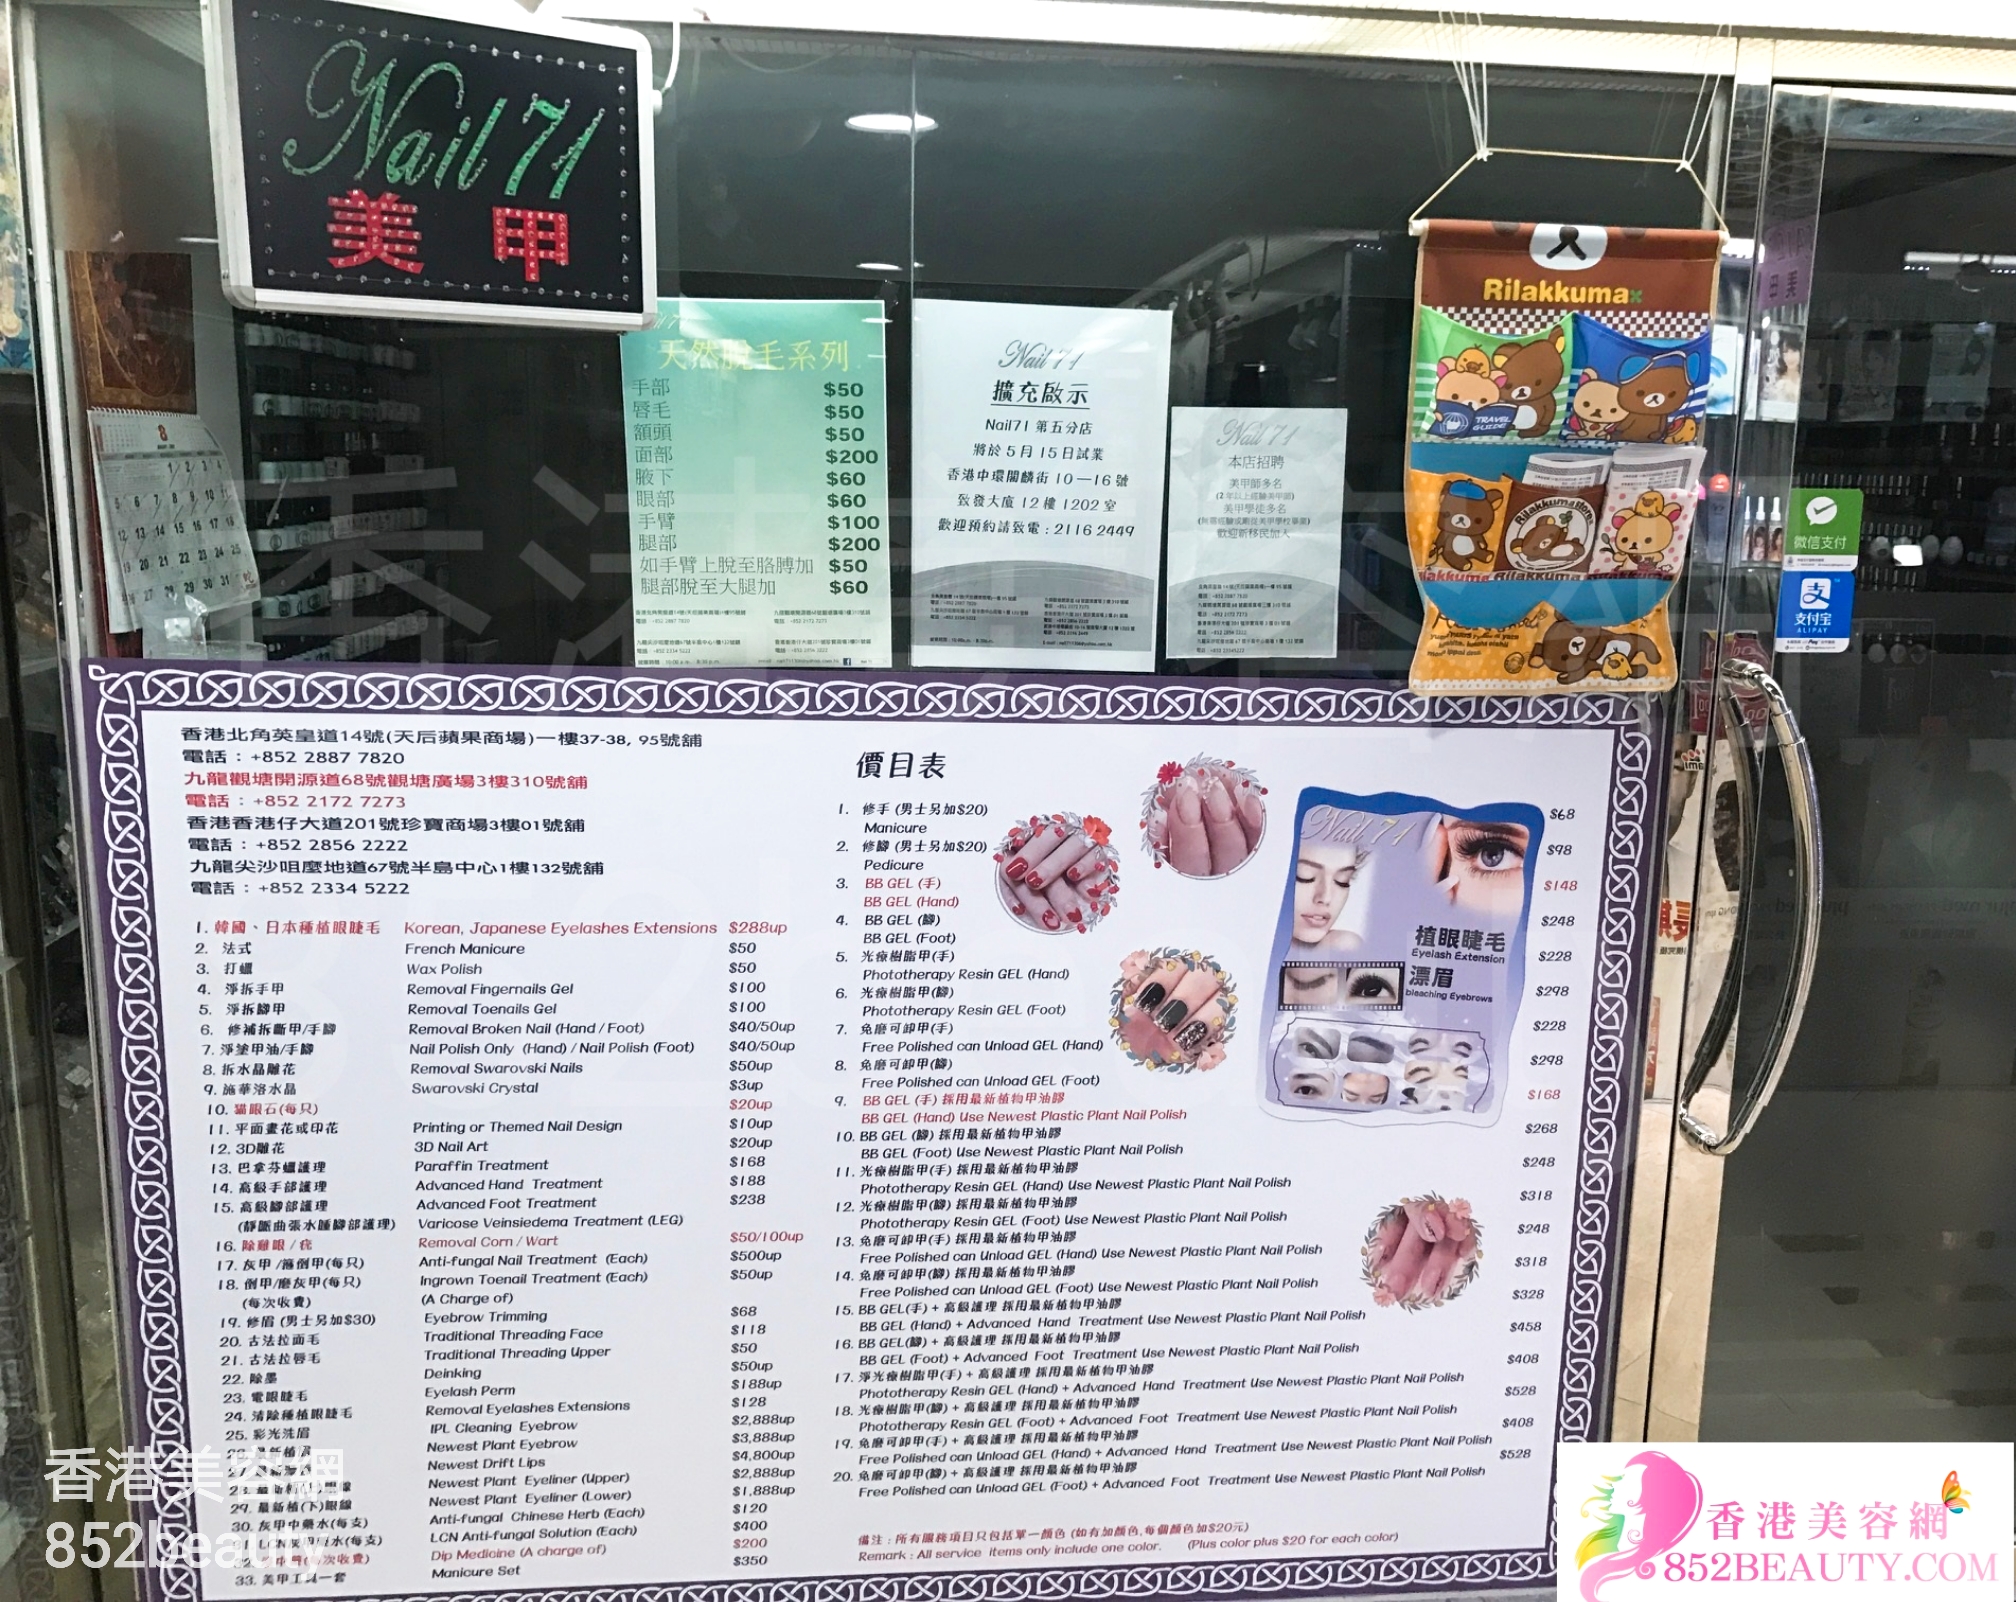 Hand and foot care: Nail 71 (觀塘店)